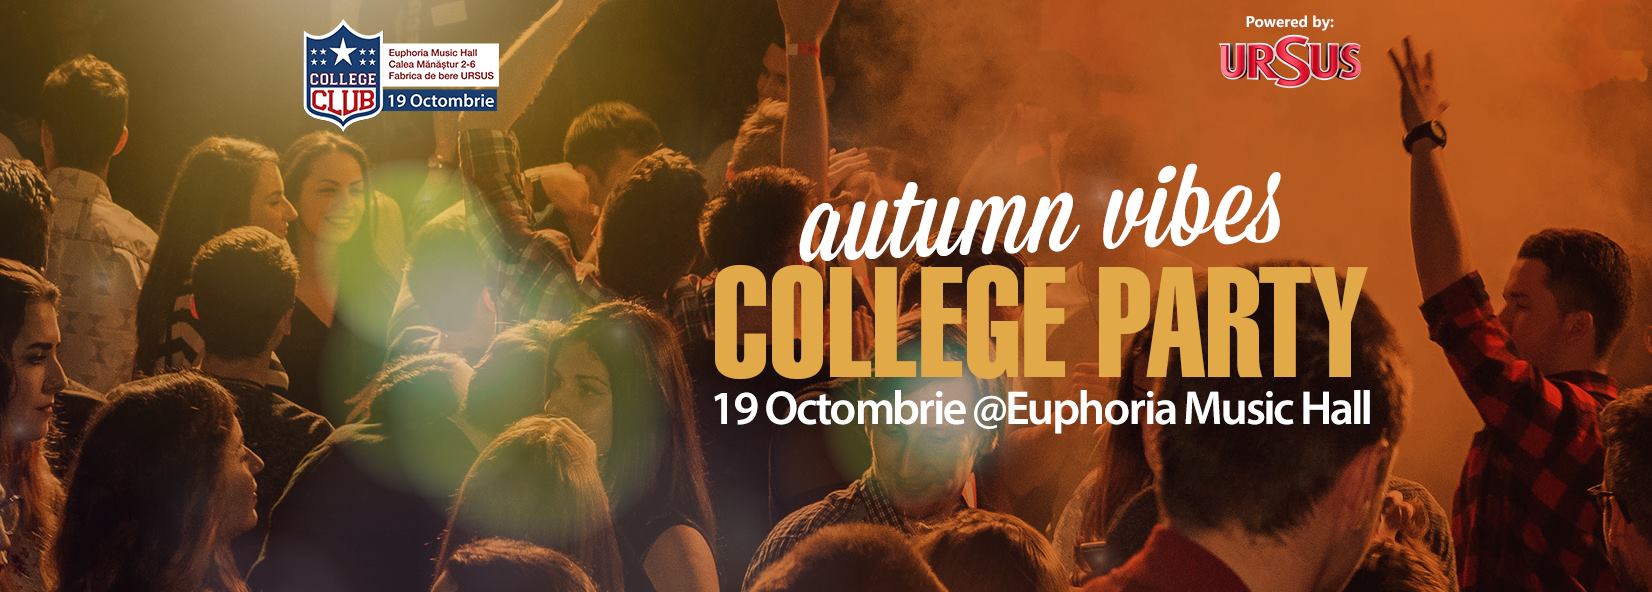 College Party – Autumn Vibes